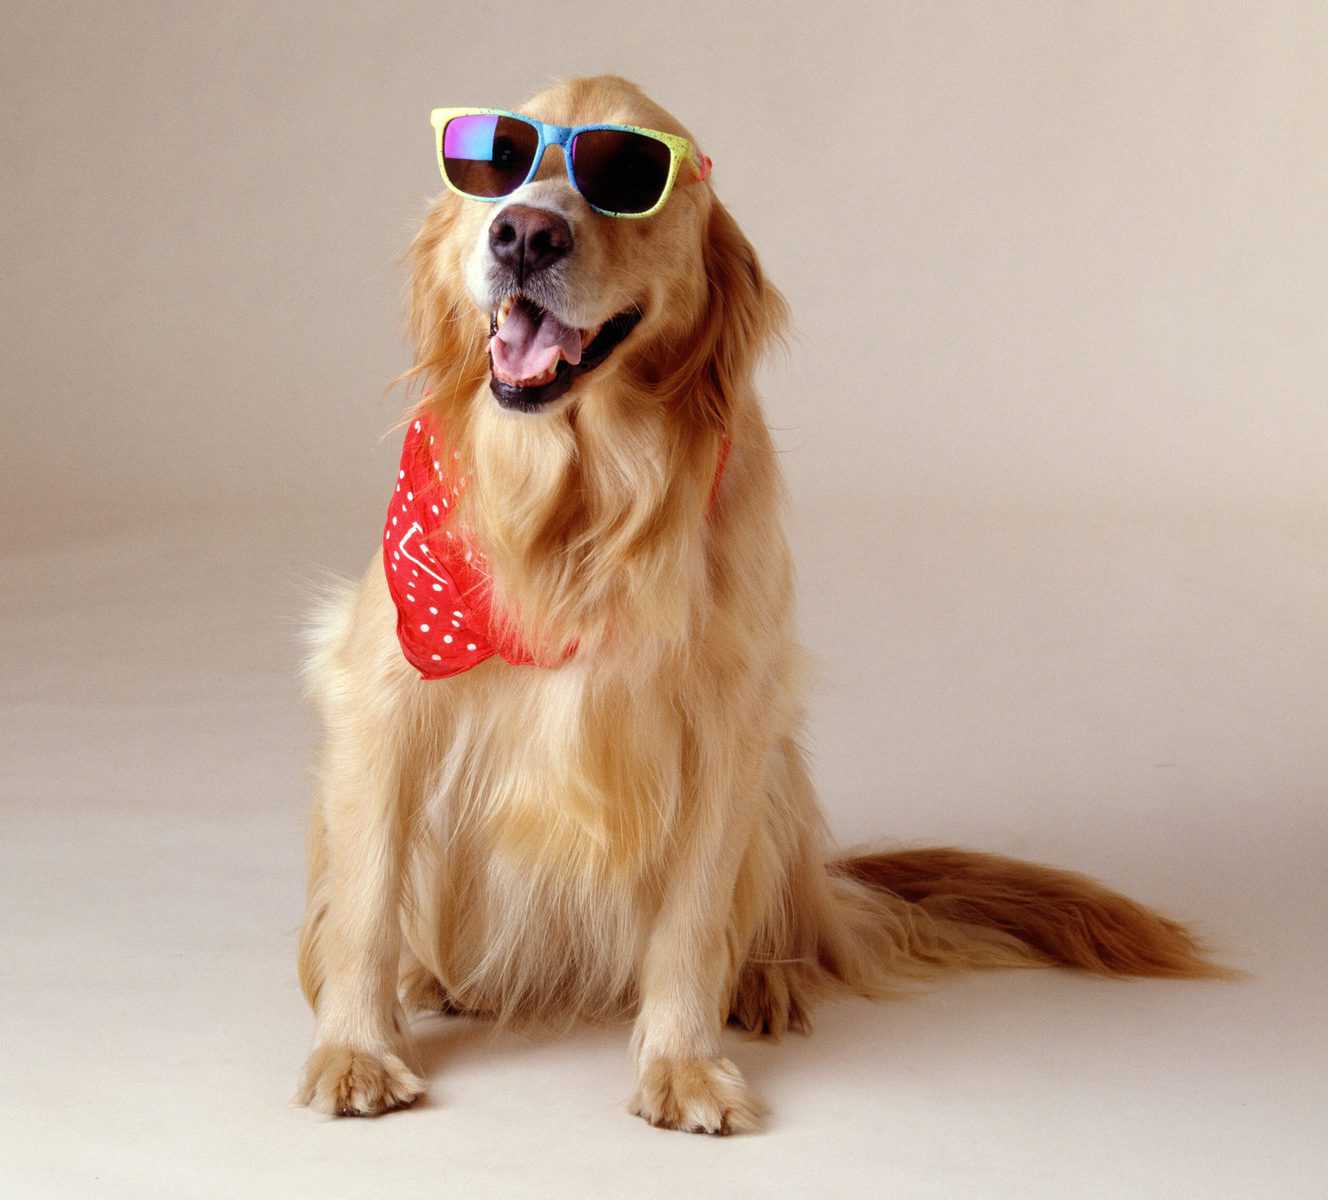 Beautiful shot of a Golden Retriever wearing cool sunglasses and a red handkerchief